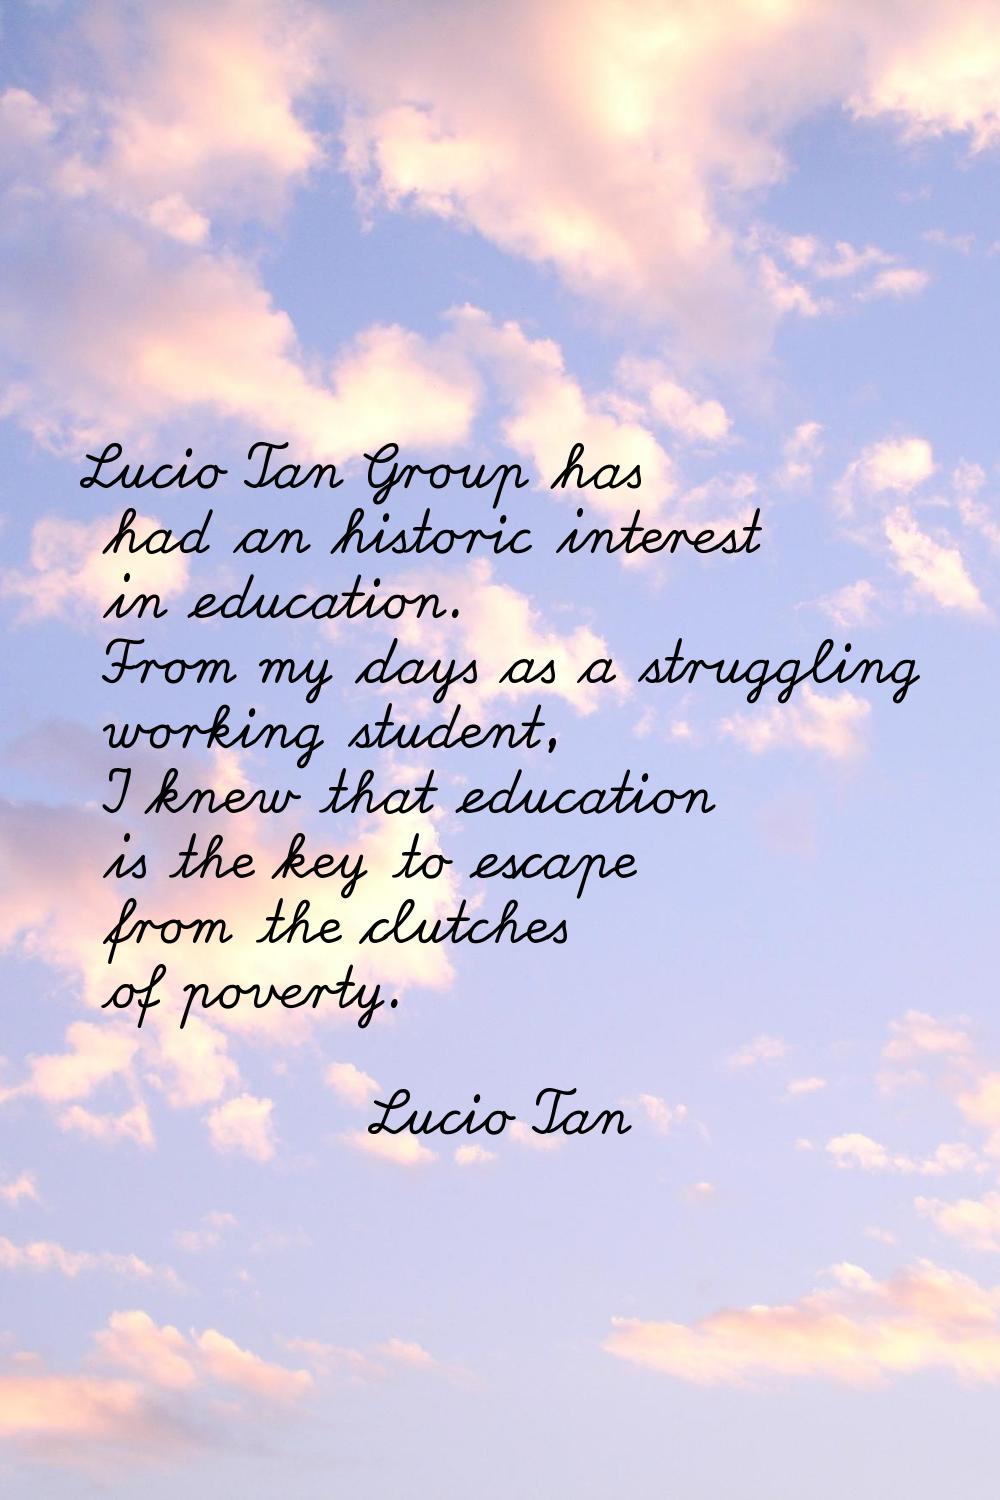 Lucio Tan Group has had an historic interest in education. From my days as a struggling working stu